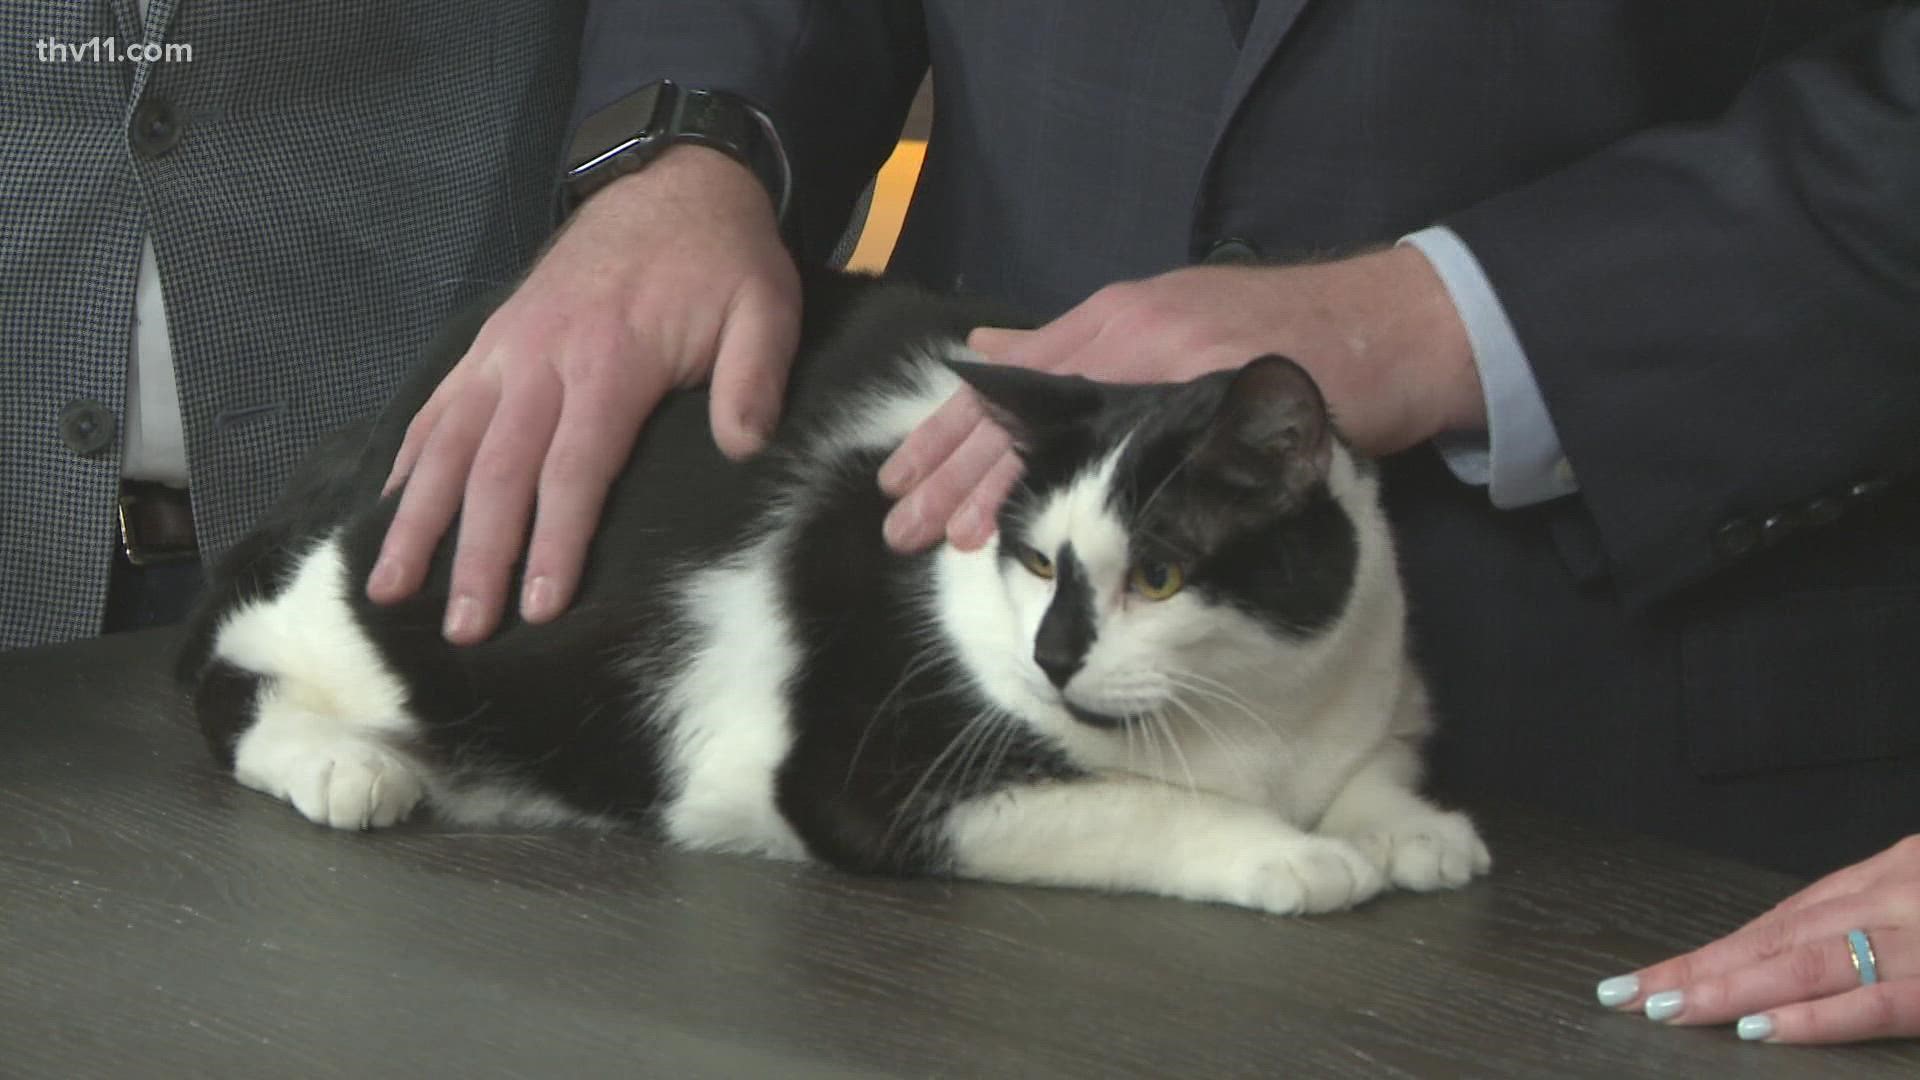 Arrow the cat is up for adoption at the Friends of the Animal Village. He is 10 years old!